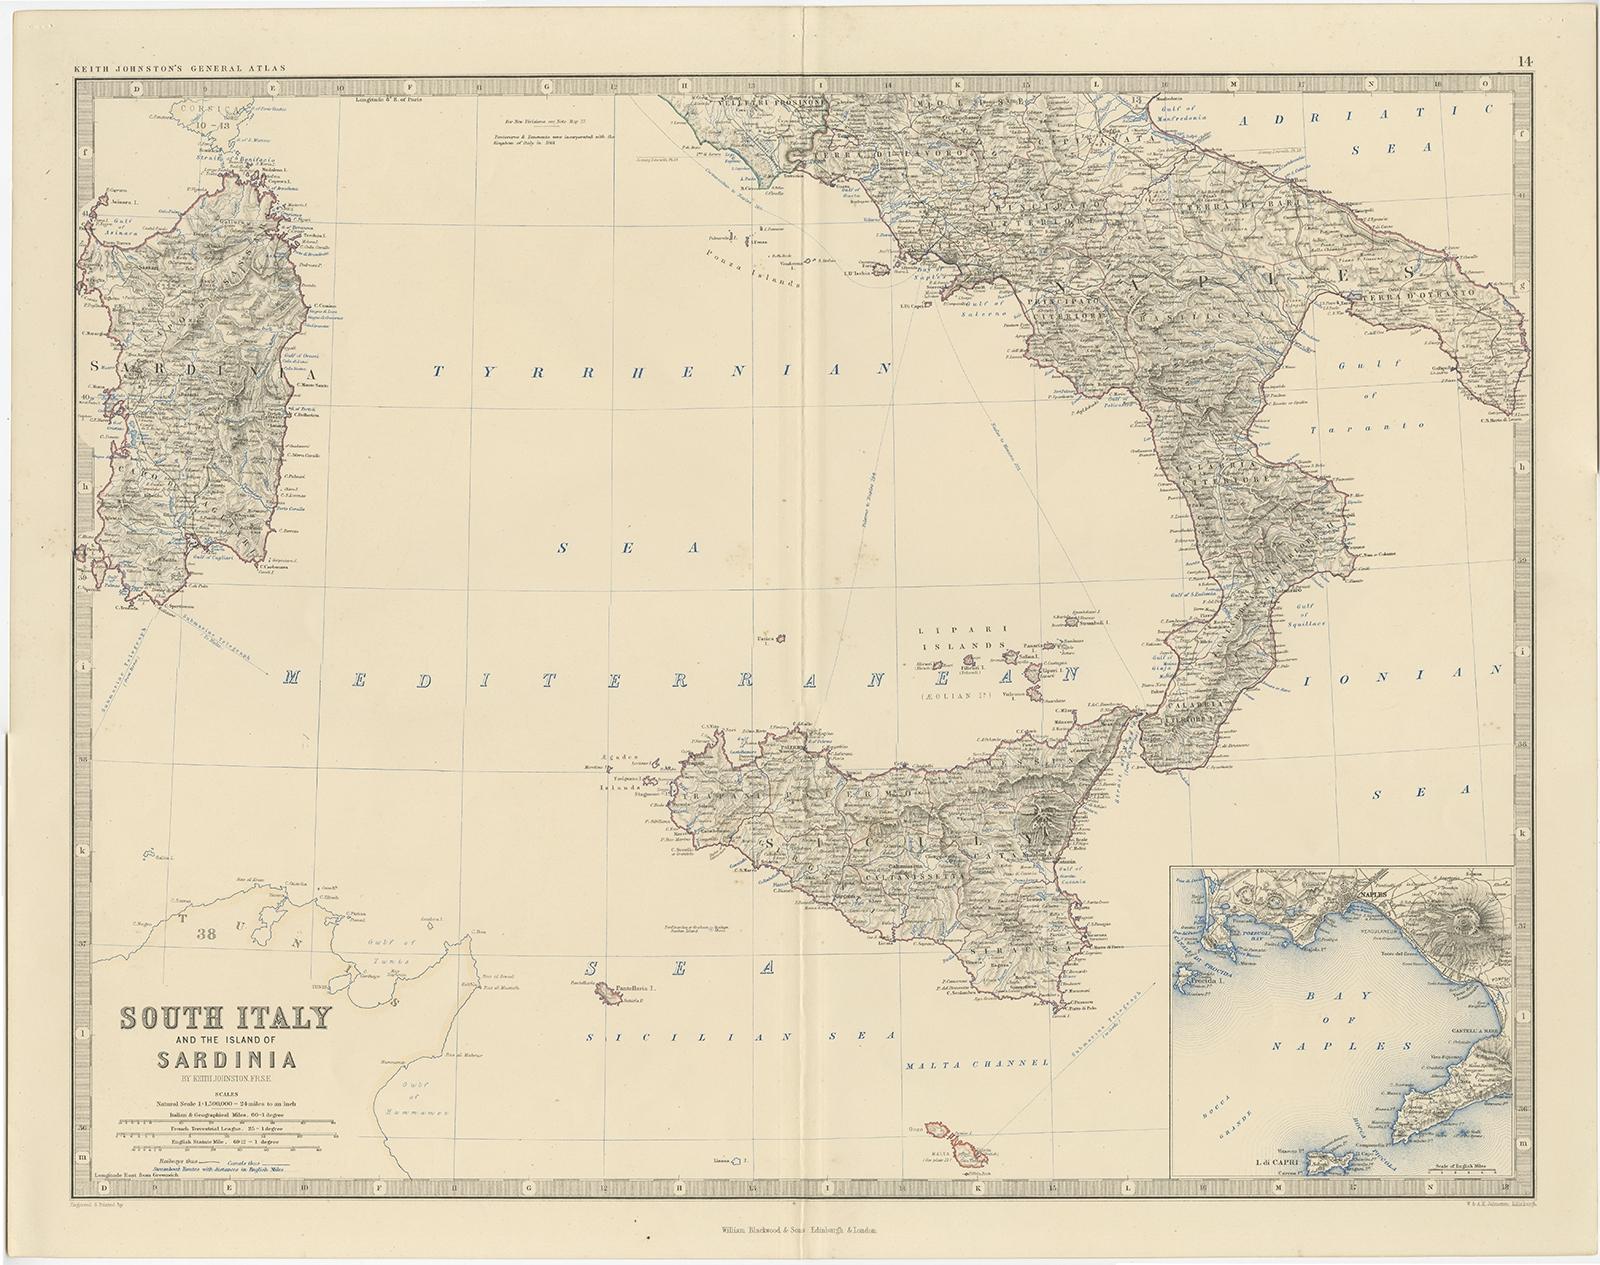 Antique map titled 'South Italy and the Island of Sardinia'. 

Old map of Southern Italy and the island of Sardinia. With an inset map of the Bay of Naples. Originates from 'The Royal Atlas Of Modern Geography Exhibiting, In A Series Of Entirely